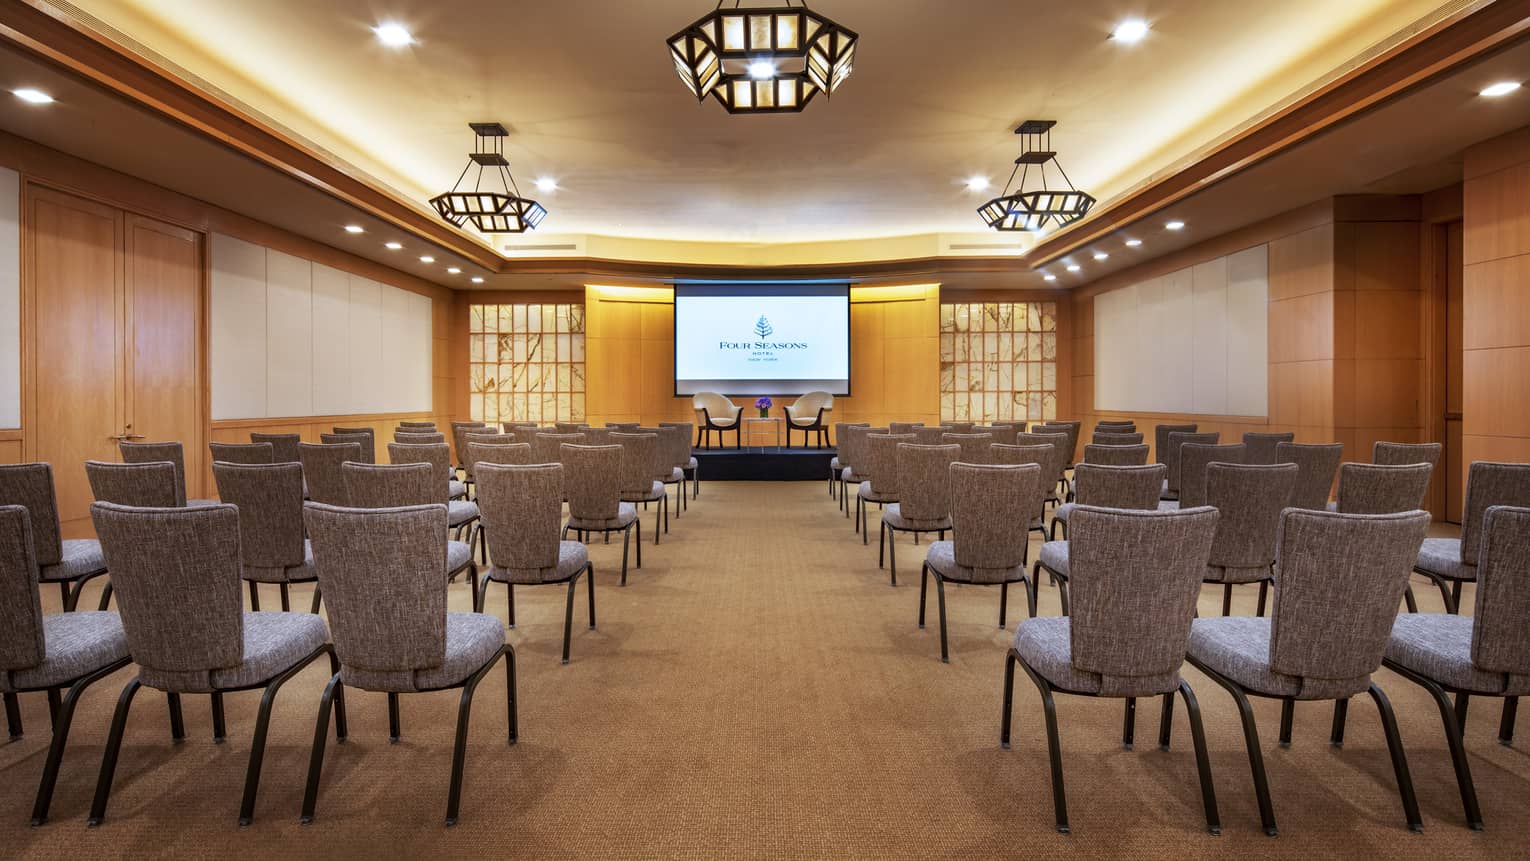 A wood-panelled function room with rows of chairs facing a presentation screen that shows a slide of the Four Seasons logo